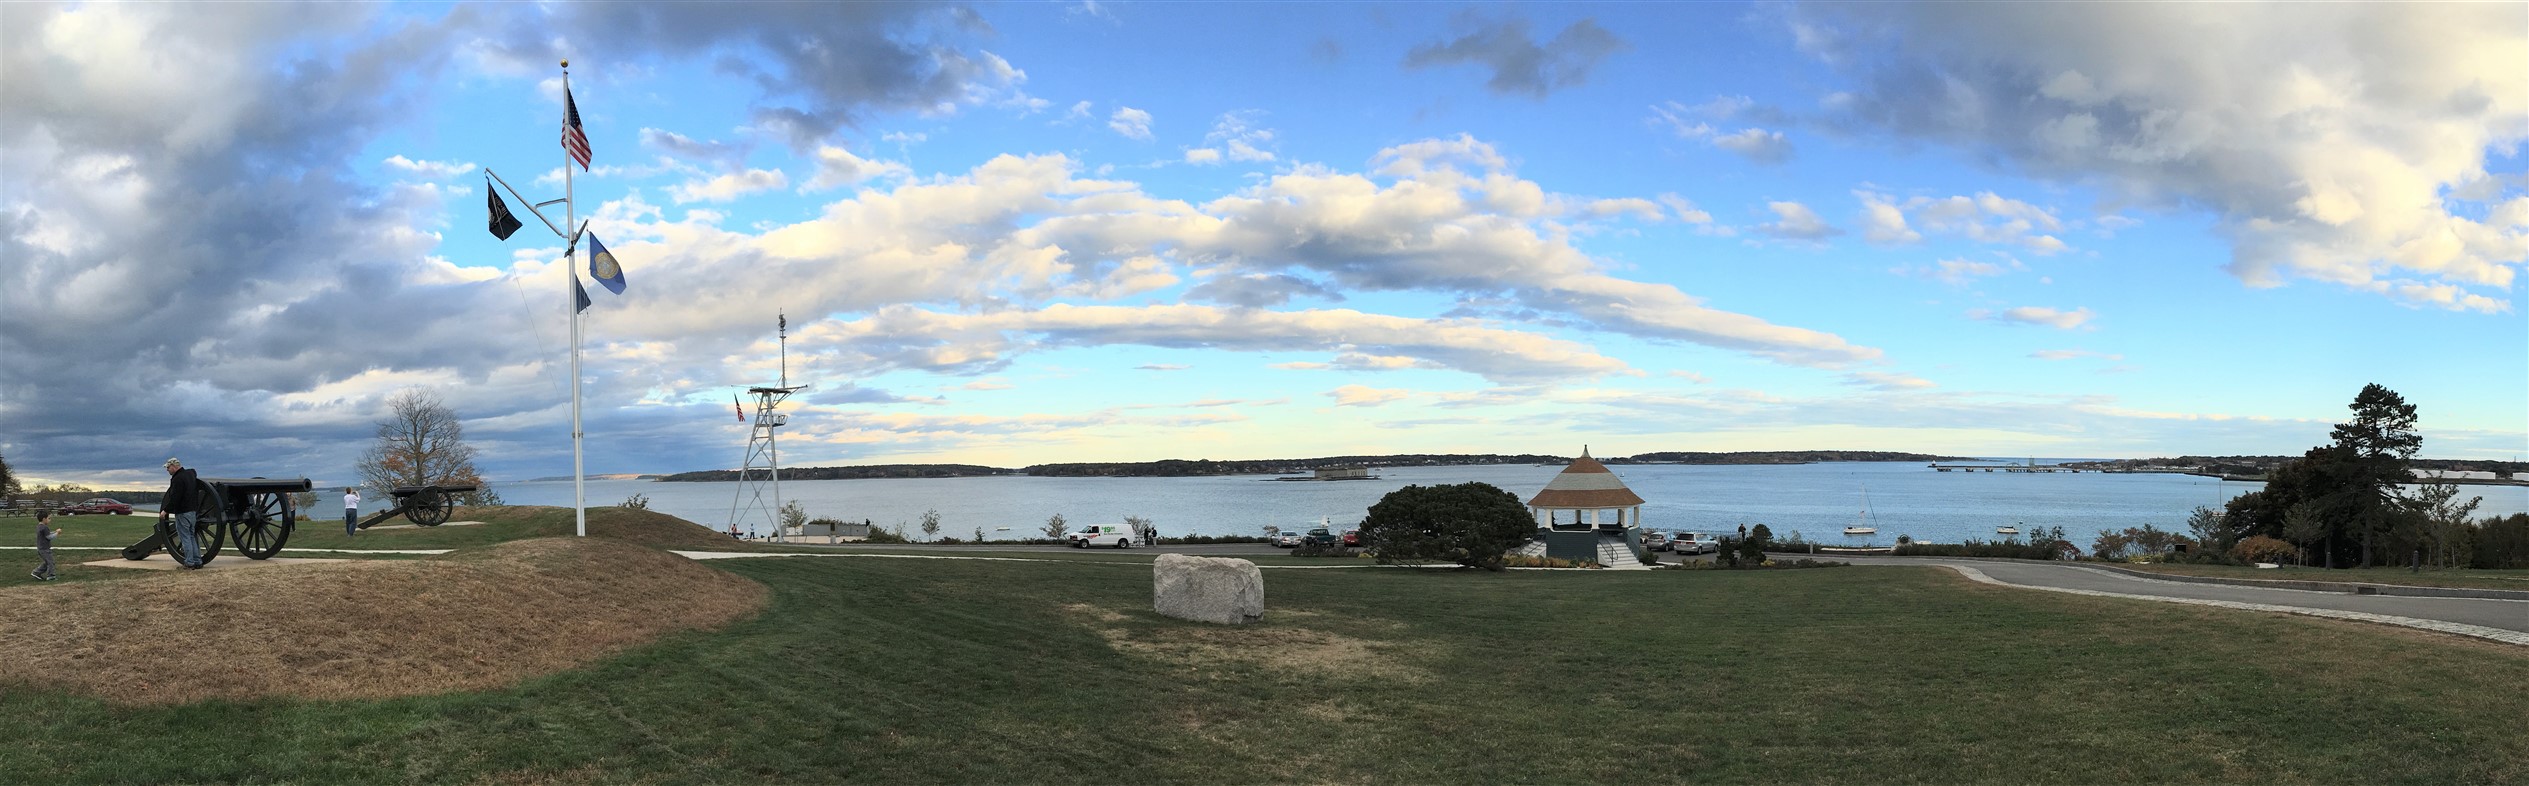 Panoramic view of the Eastern Promenade park overlooking the ocean